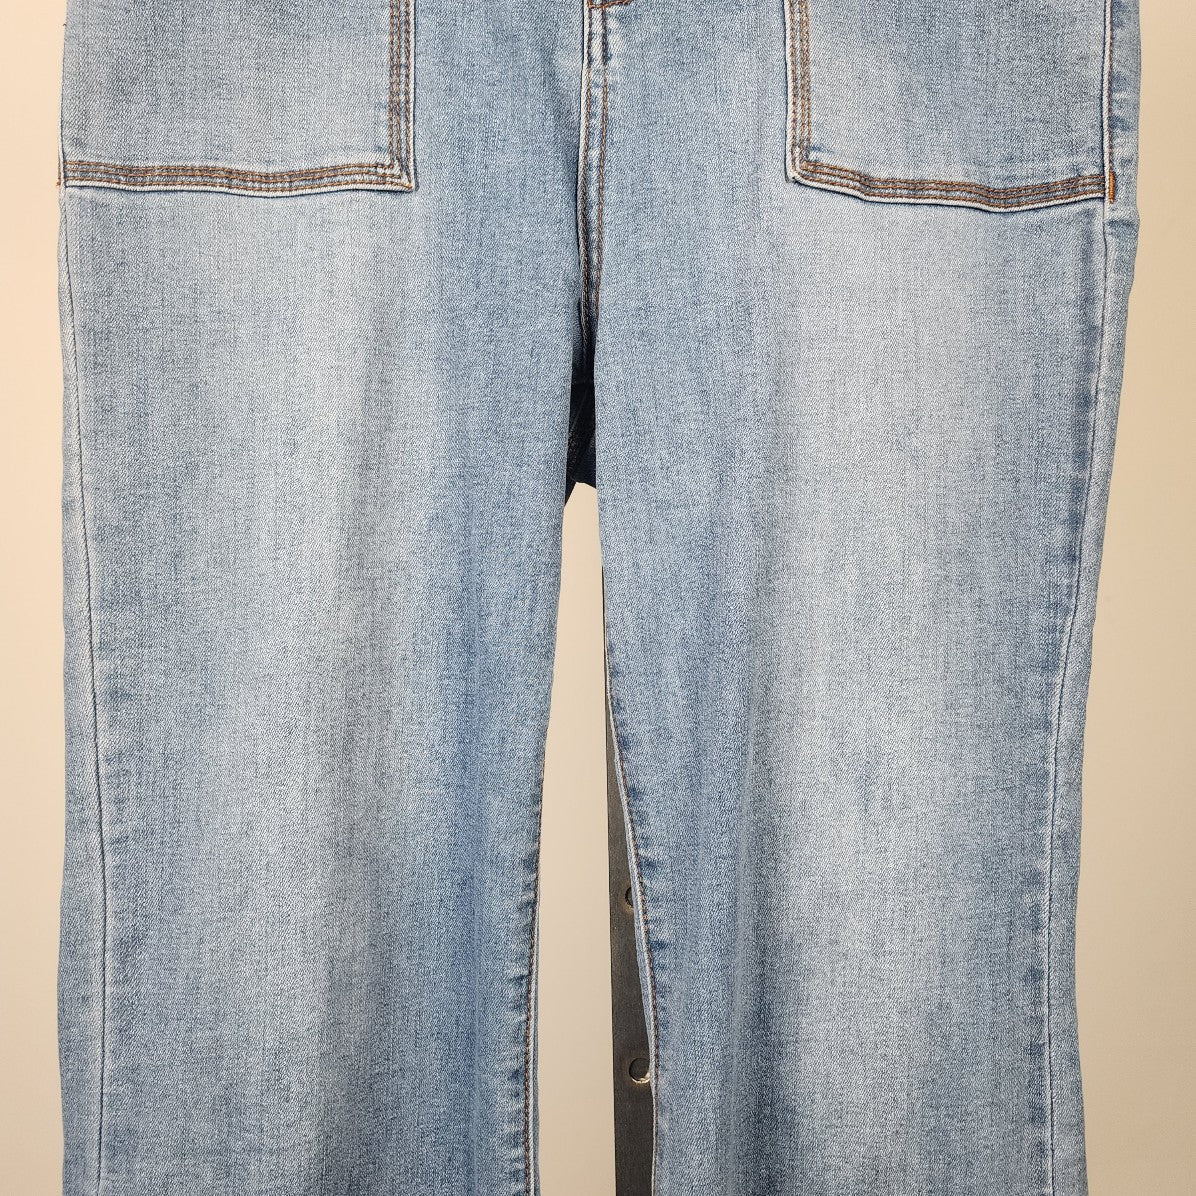 Monkey Ride Jeans Hight Waisted Cropped Belle Bottom Jeans Size 11/30